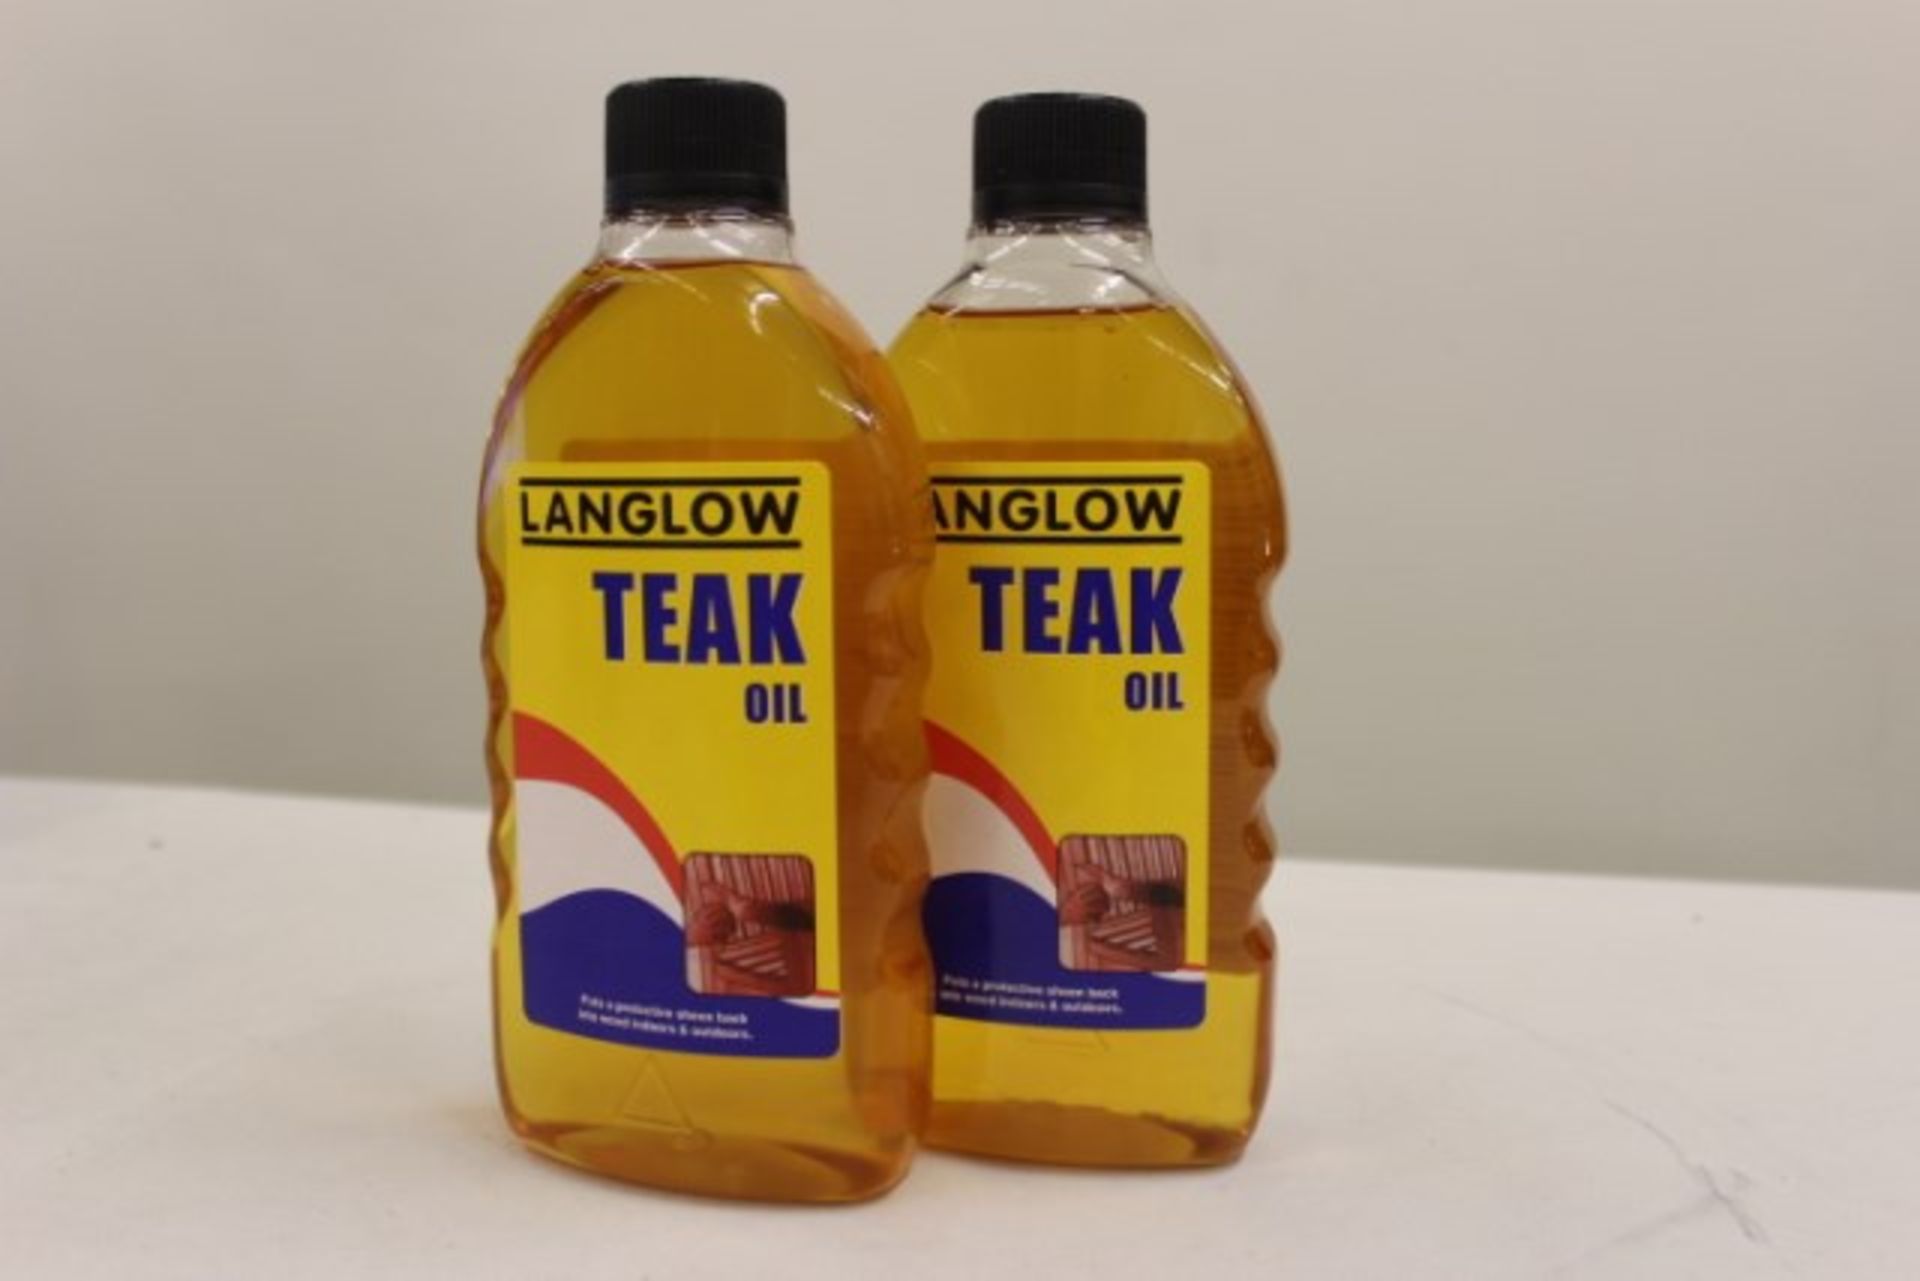 V *TRADE QTY* Grade A Two Bottles 500ml Teak oil X 3 Bid price to be multiplied by Three